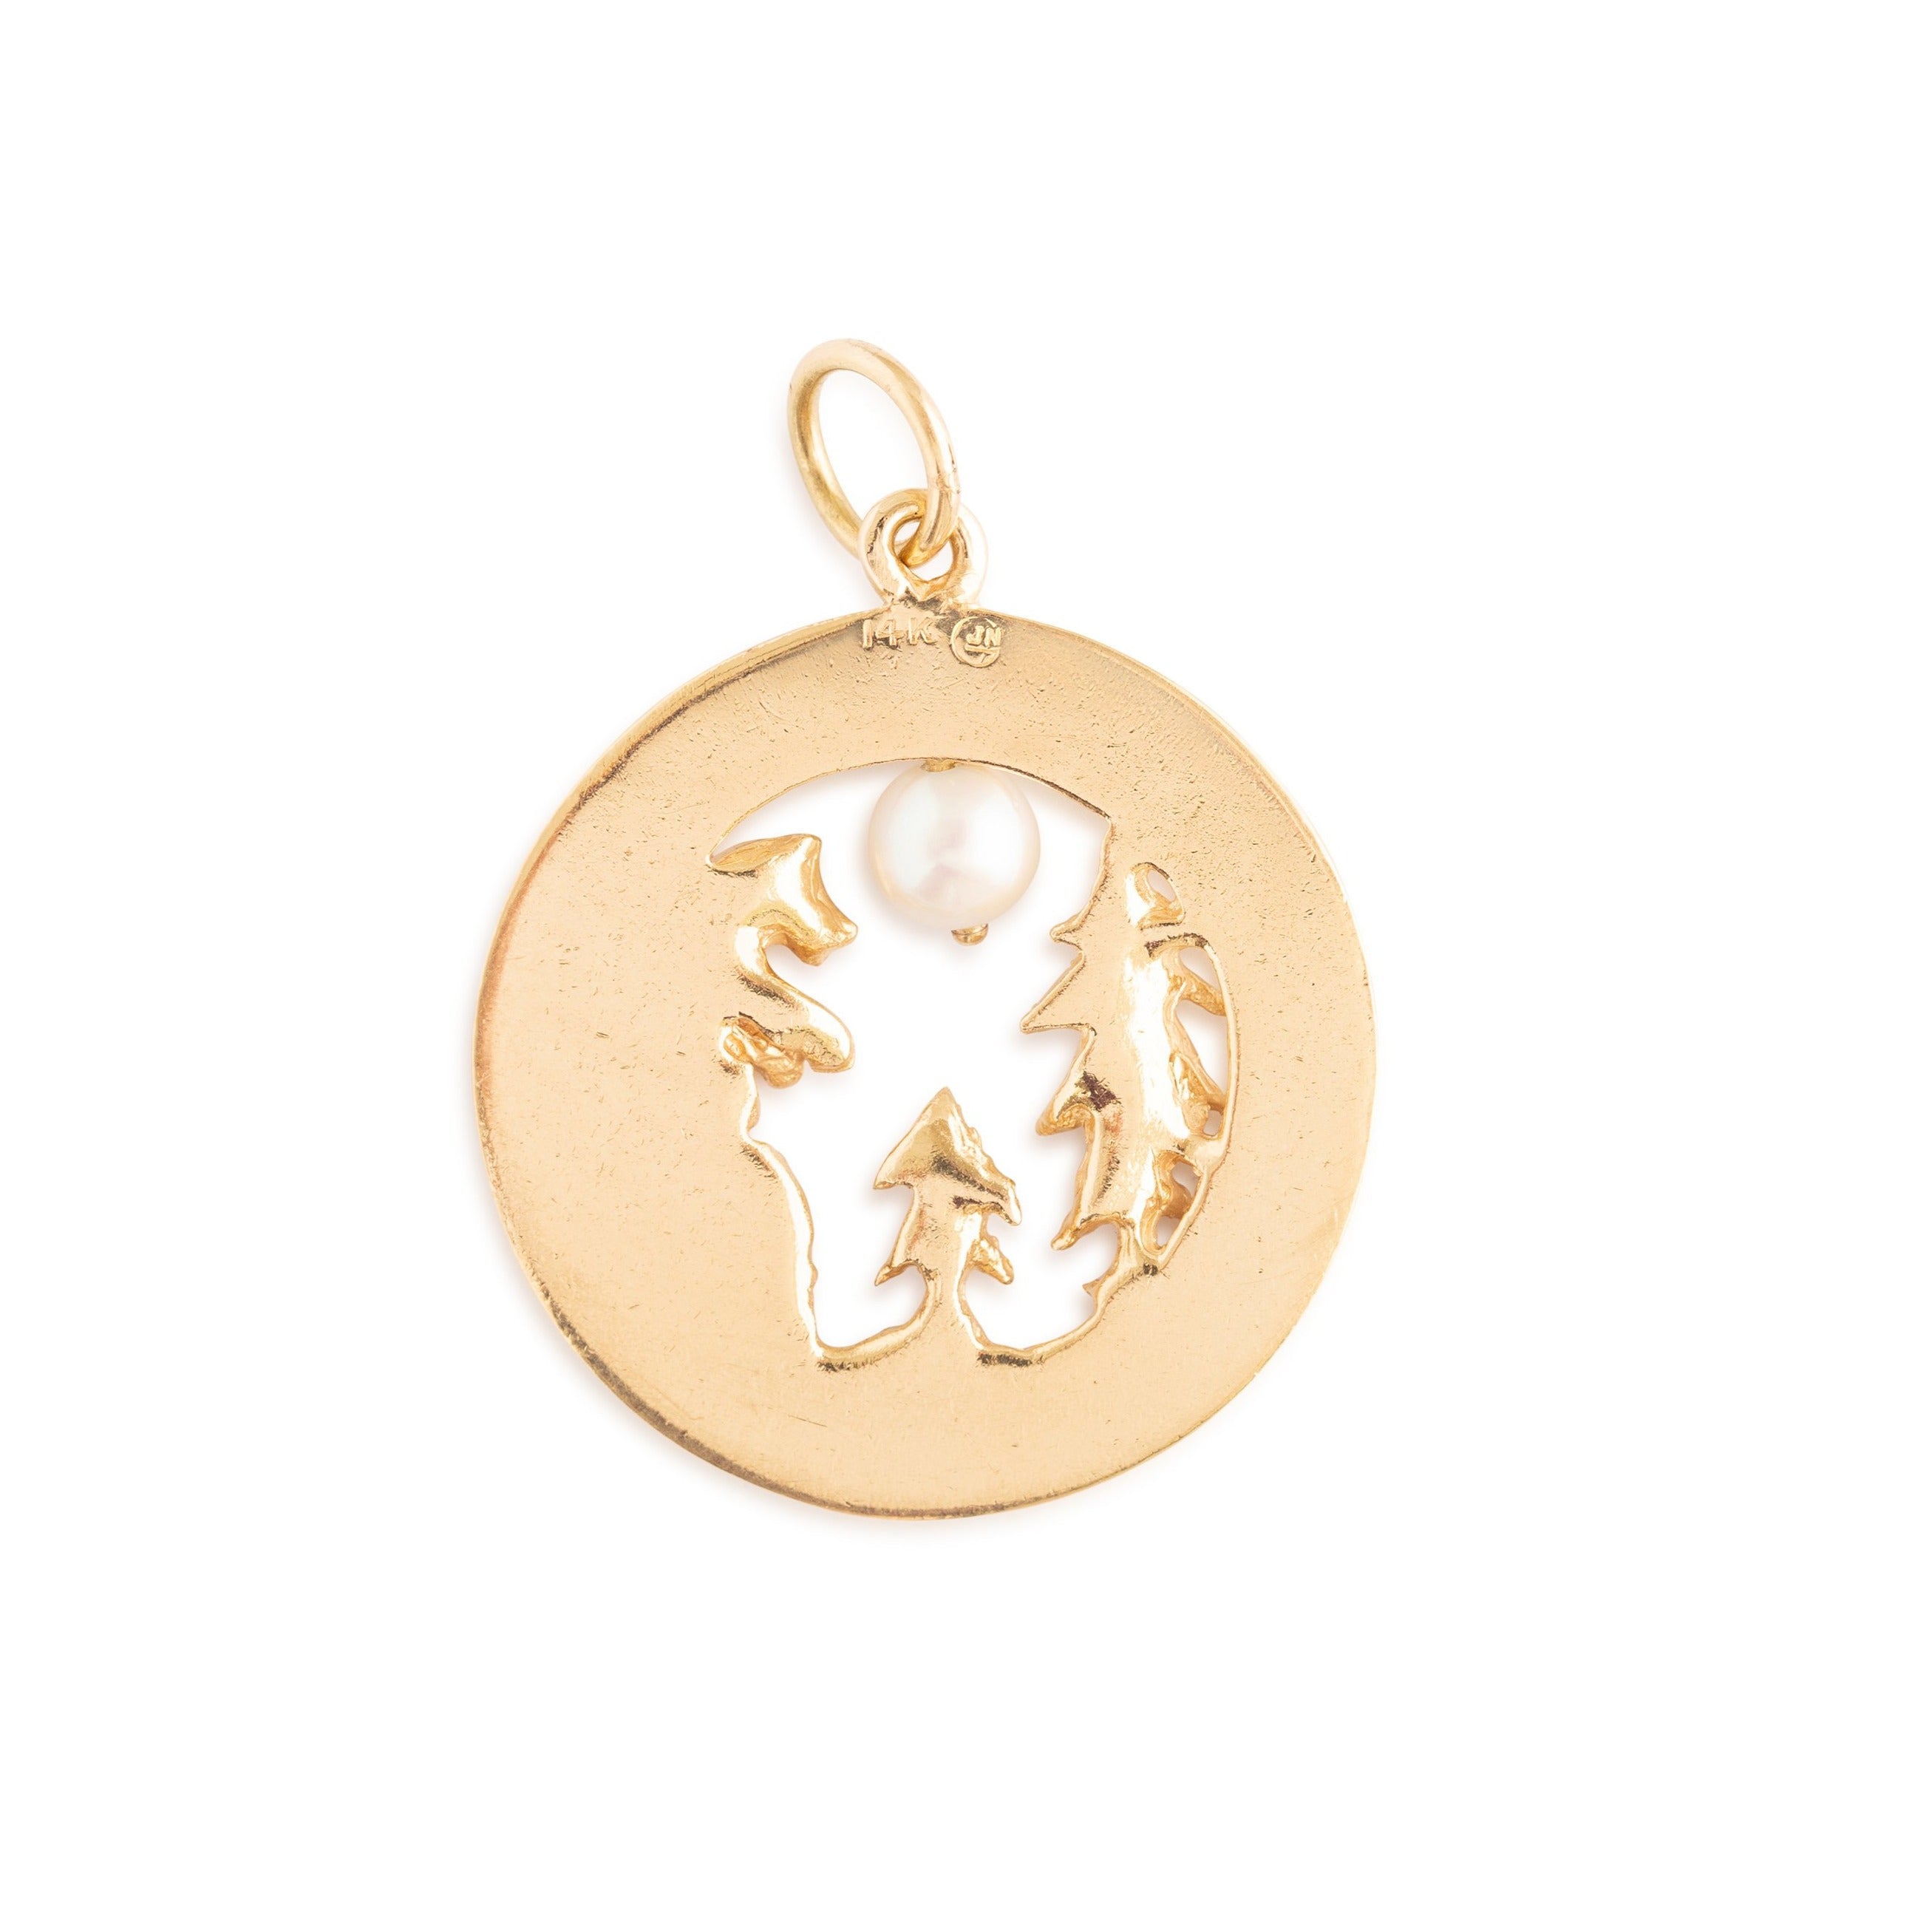 Large Pearl and 14K Gold "California" Charm